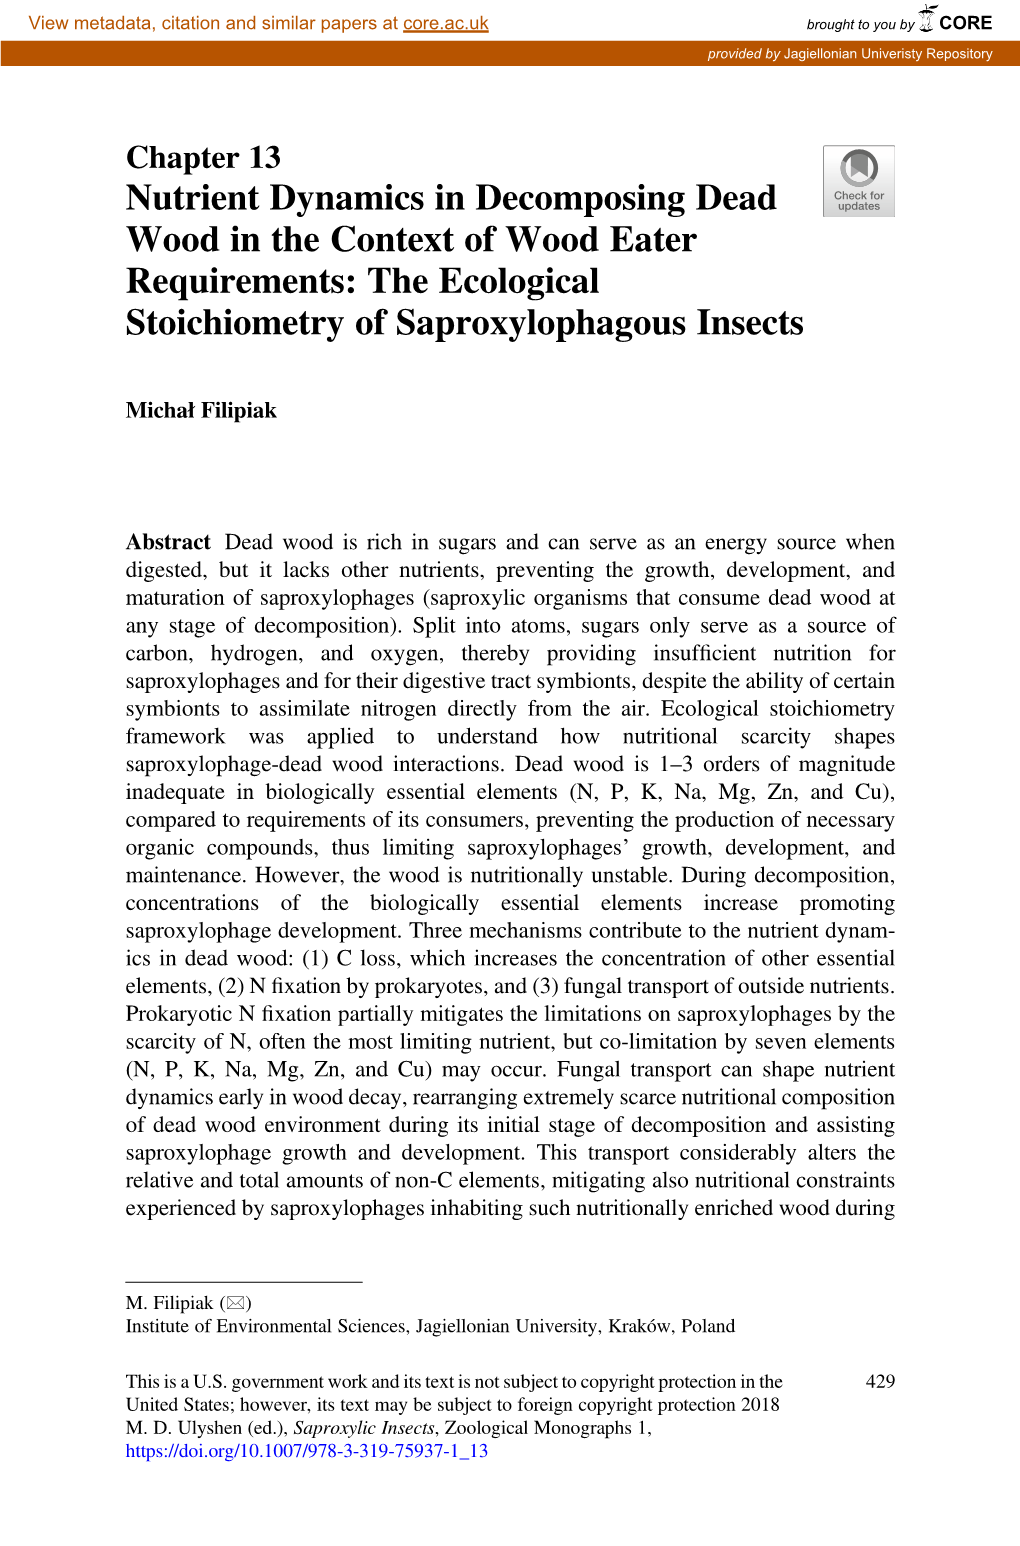 The Ecological Stoichiometry of Saproxylophagous Insects